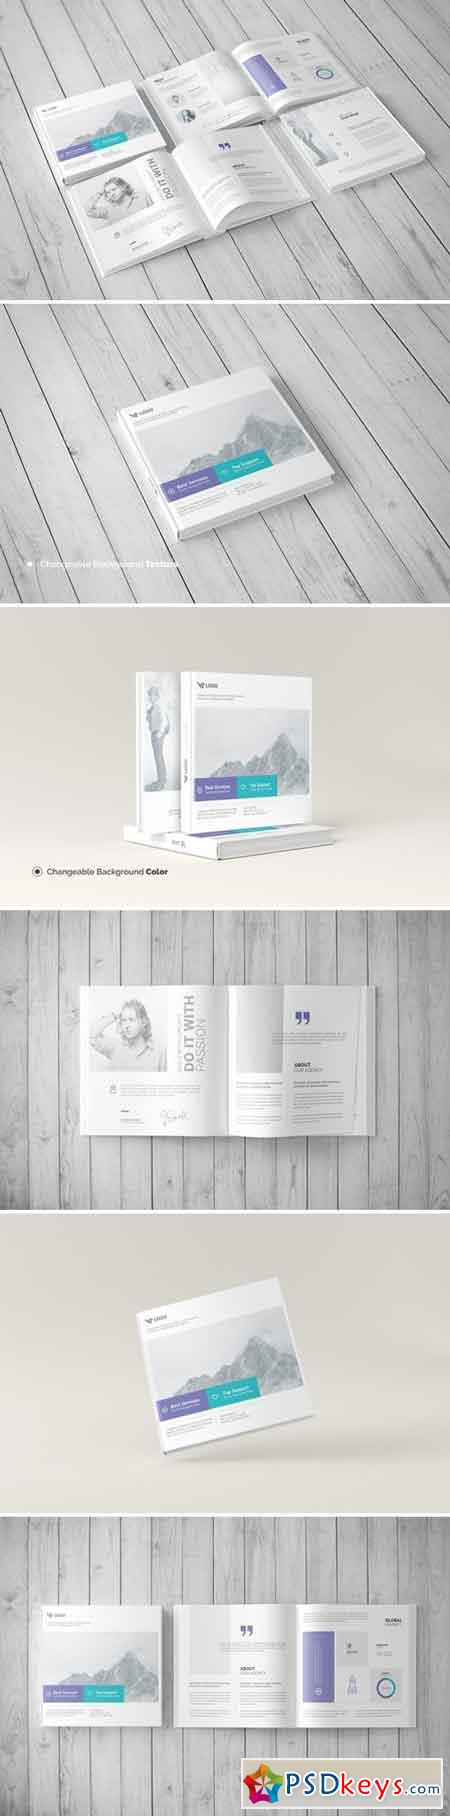 Download Square Book Mock Up Hardcover 1536867 Free Download Photoshop Vector Stock Image Via Torrent Zippyshare From Psdkeys Com Yellowimages Mockups